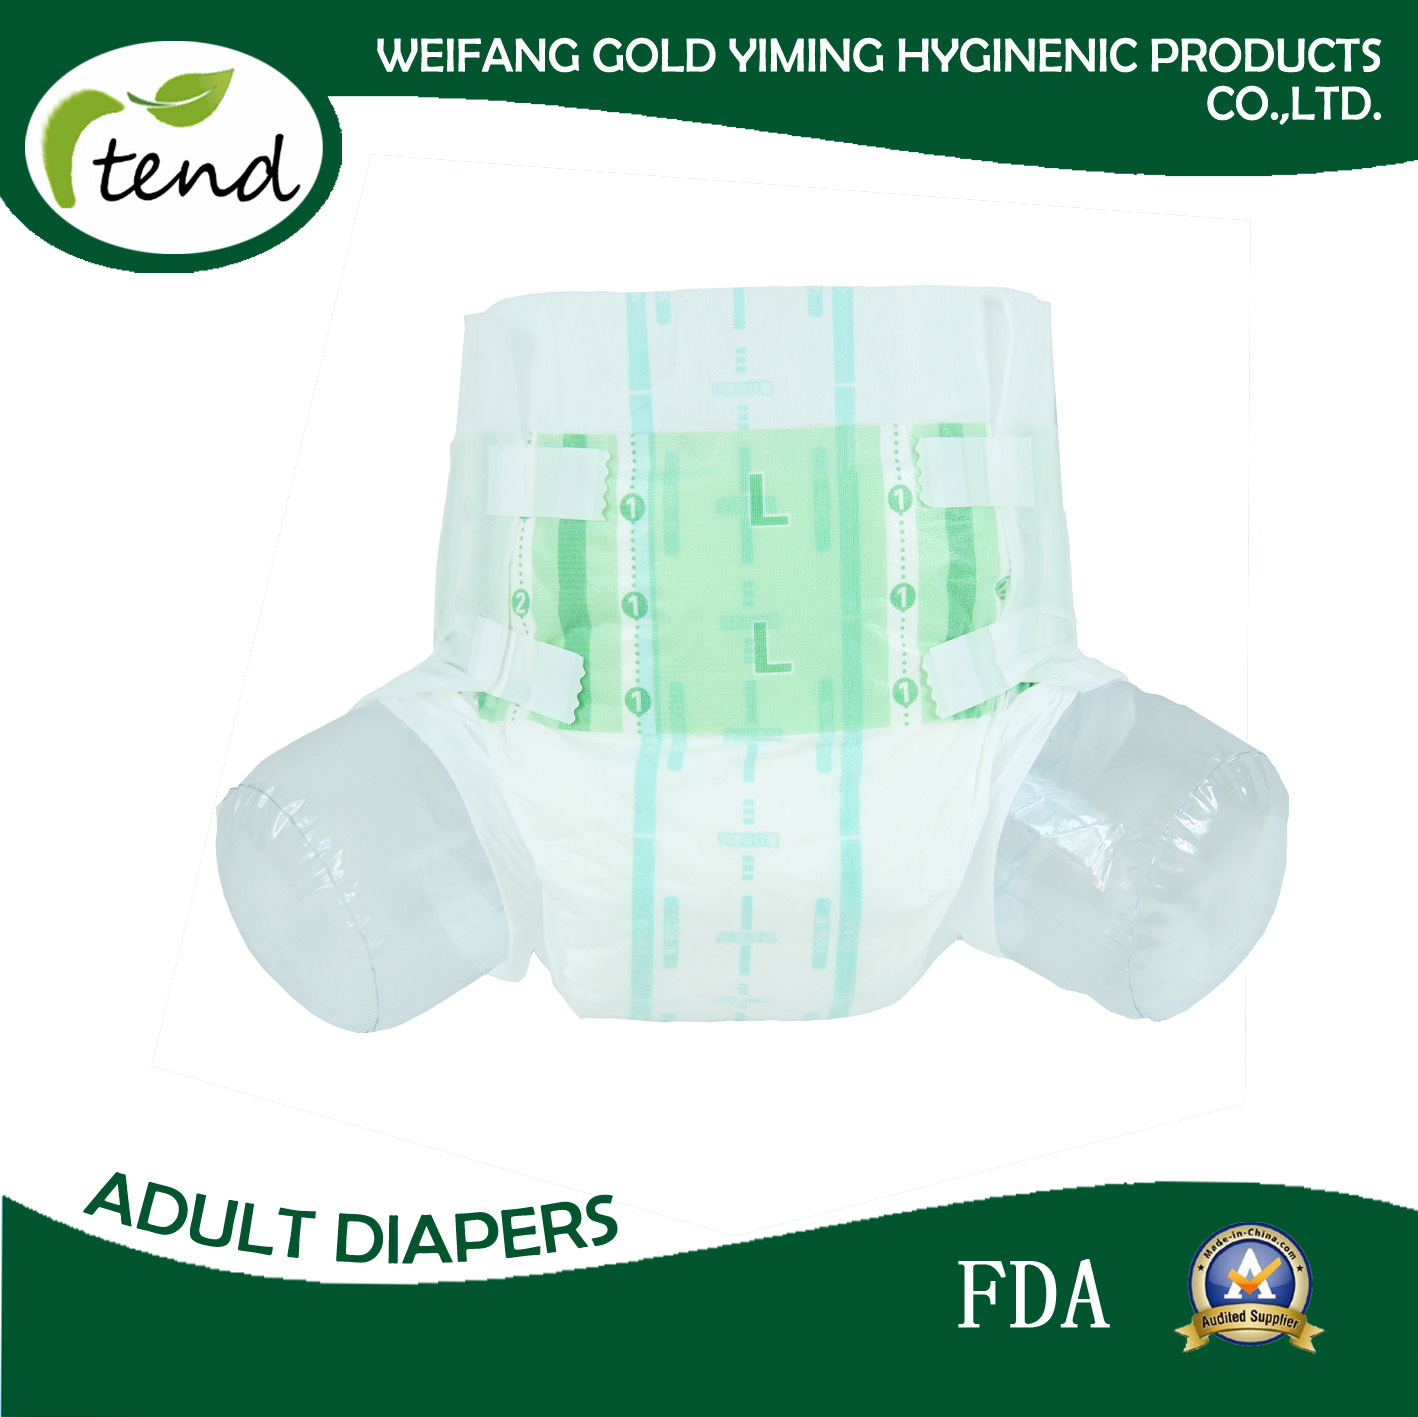 Wholesale Overnight Absorbency Disposable/Adult Nappy/Adult Brief/Adult Diaper for Men and Women/Home/Hospital/Medical/Nursing Home/Magic Tape/PE Film/M/L/XL